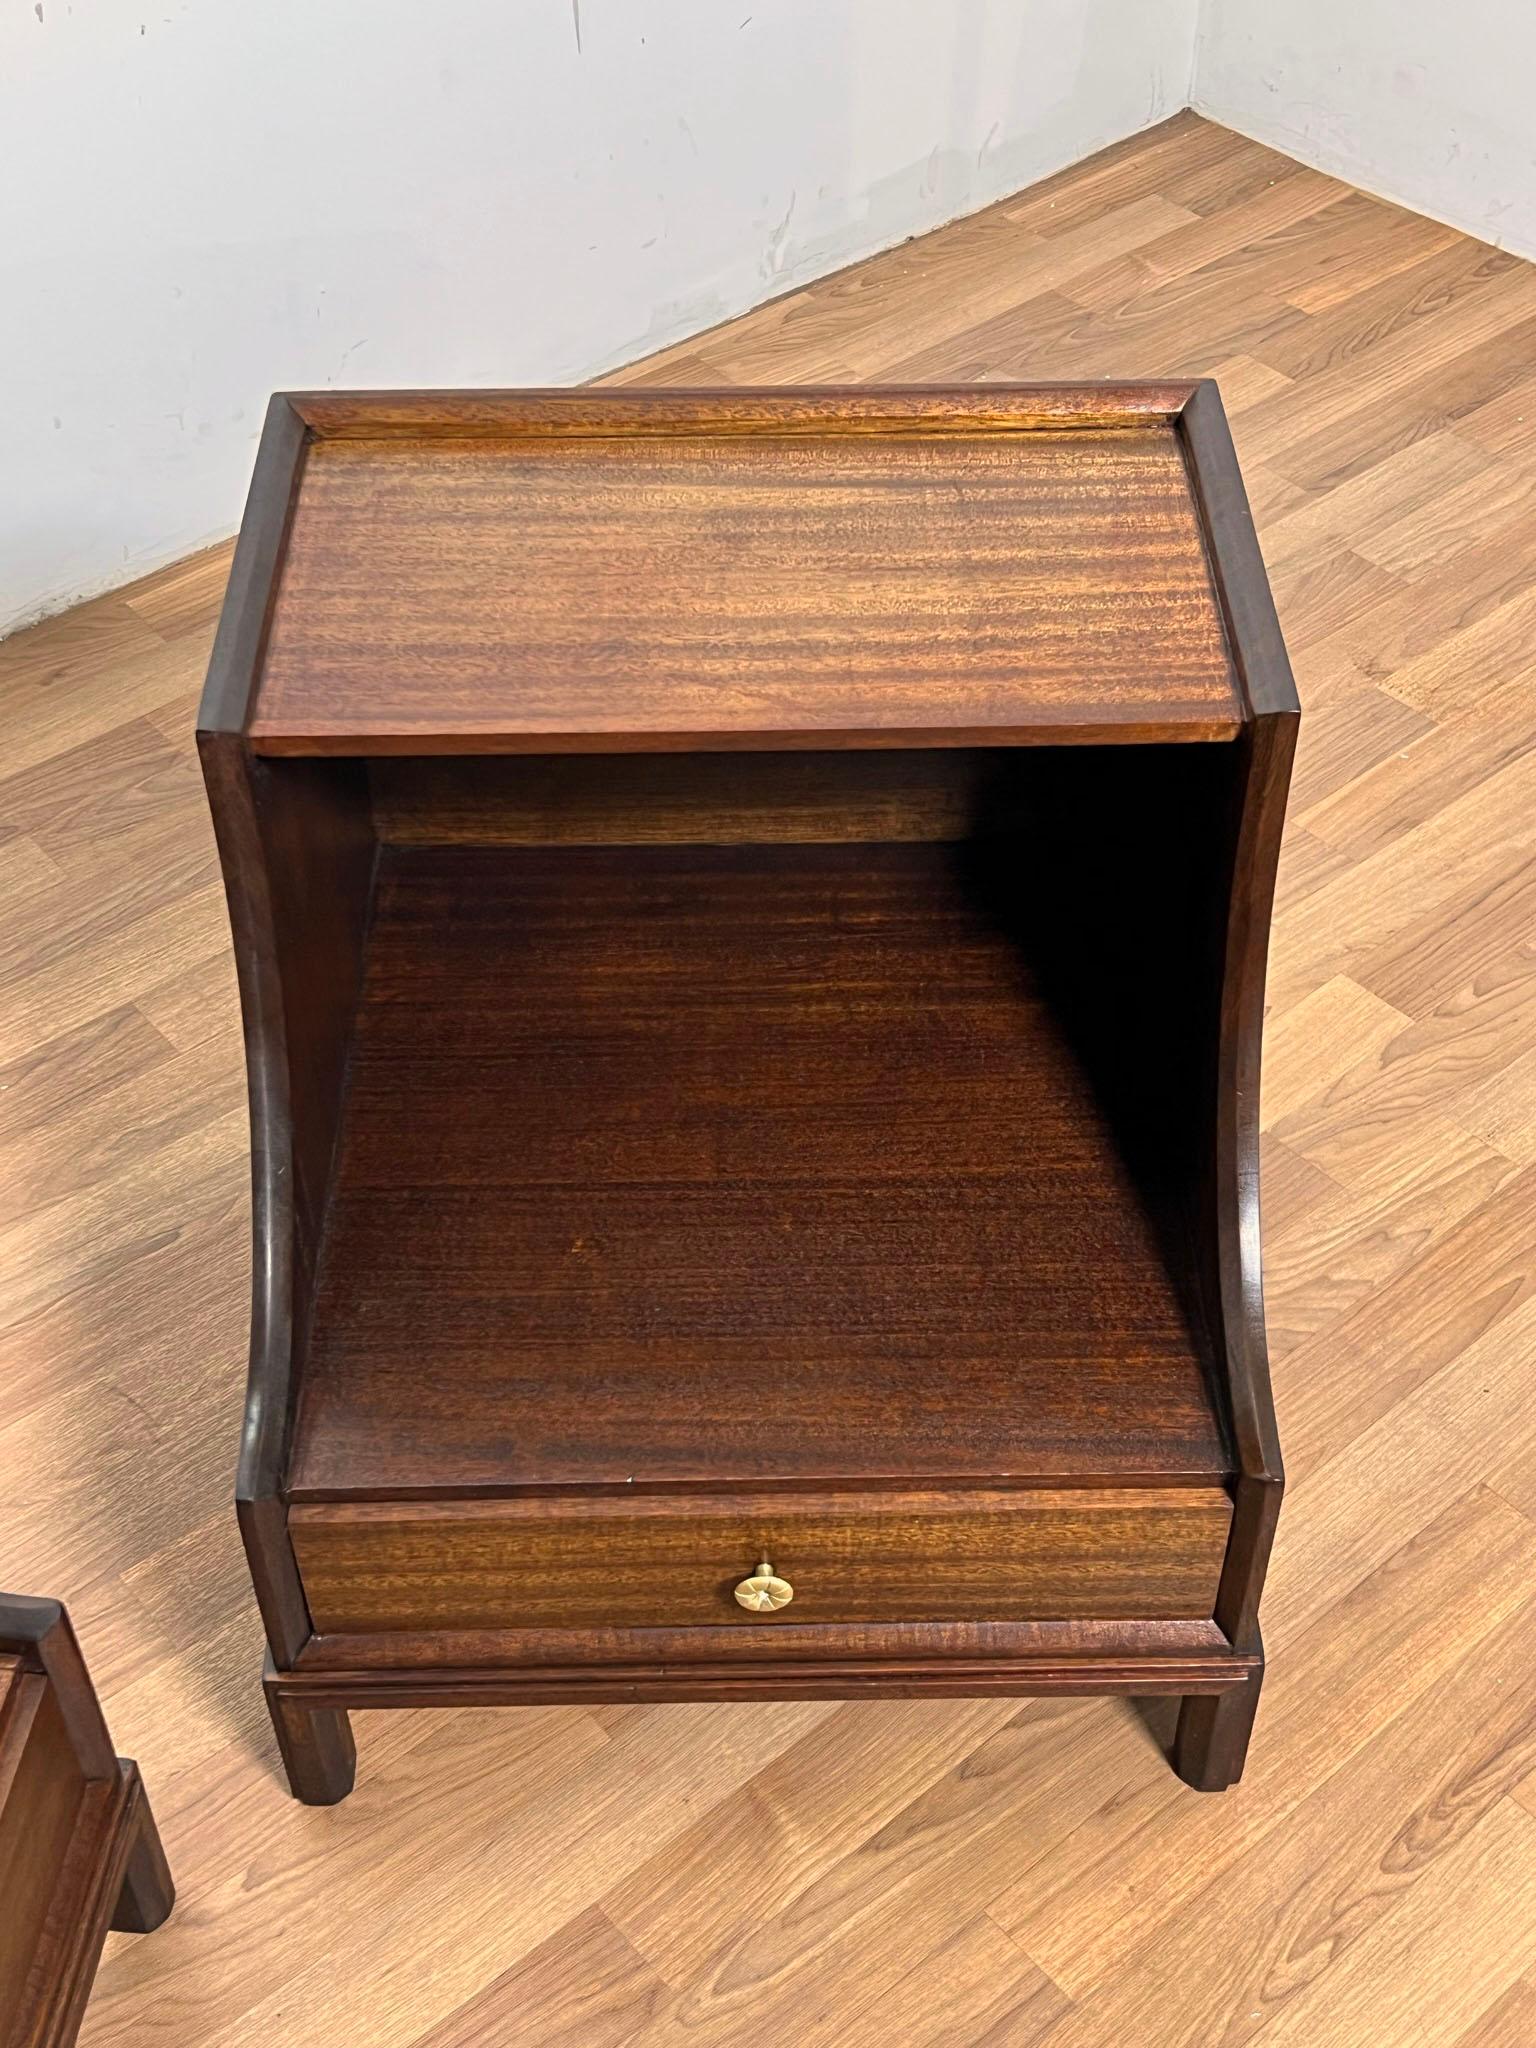 Mahogany Pair of Tommi Parzinger for Charak Modern Night Stands, circa 1950s For Sale